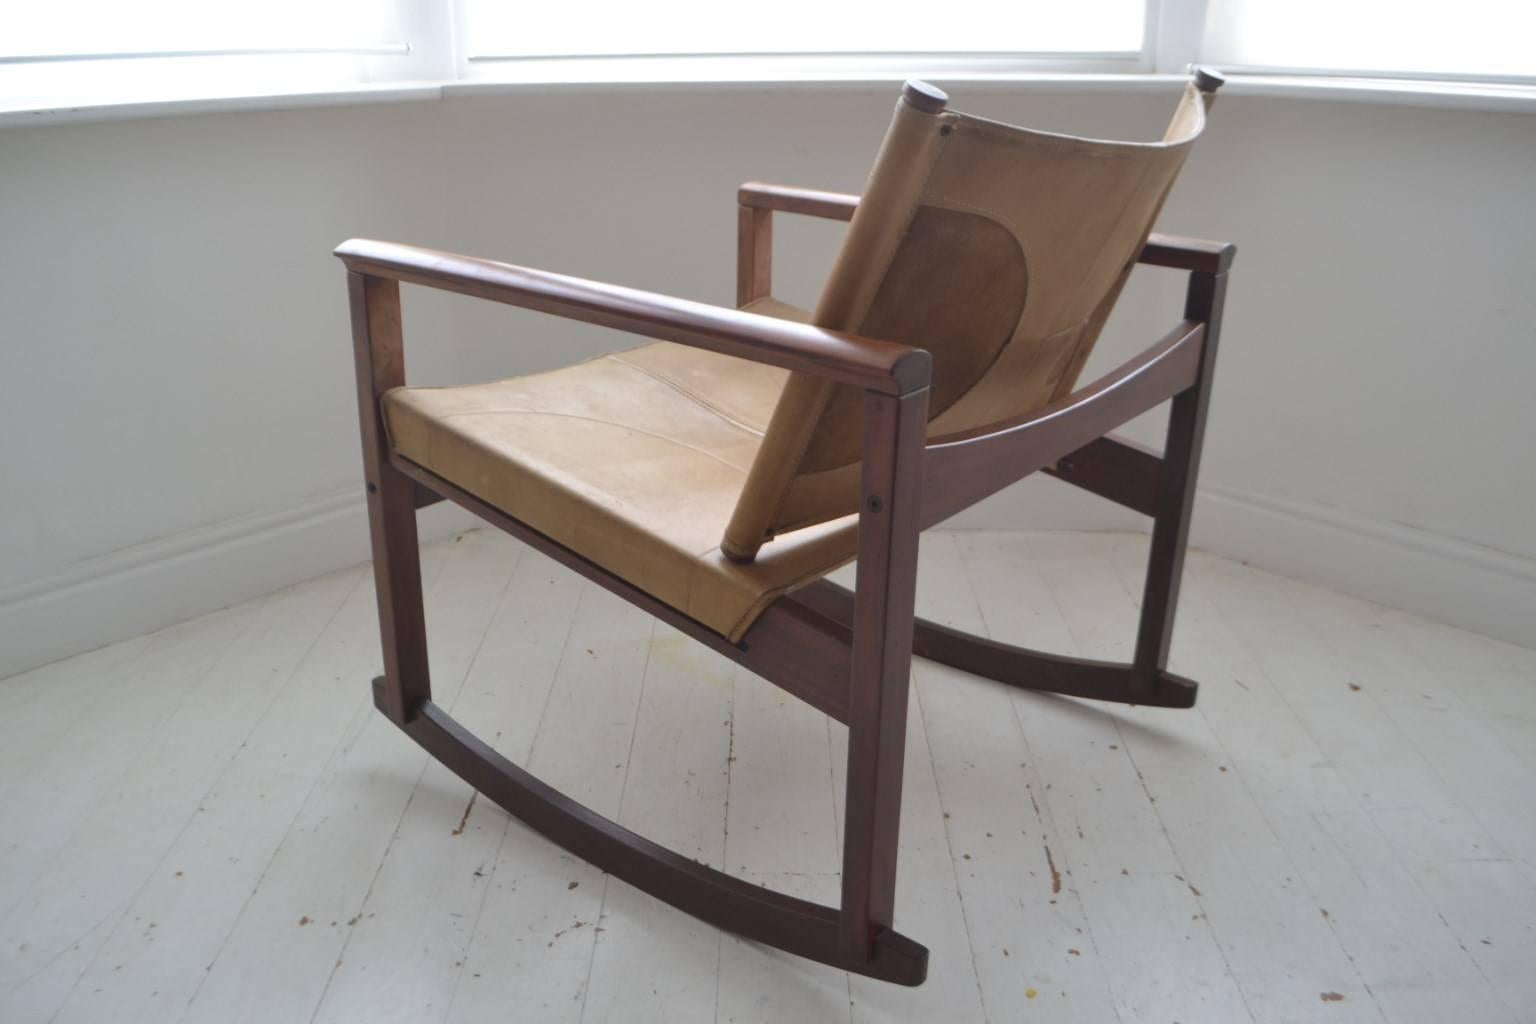 Brazilian Vintage Rosewood and Leather Sling PegLev Rocking Chair by Michel Arnoult, 1968